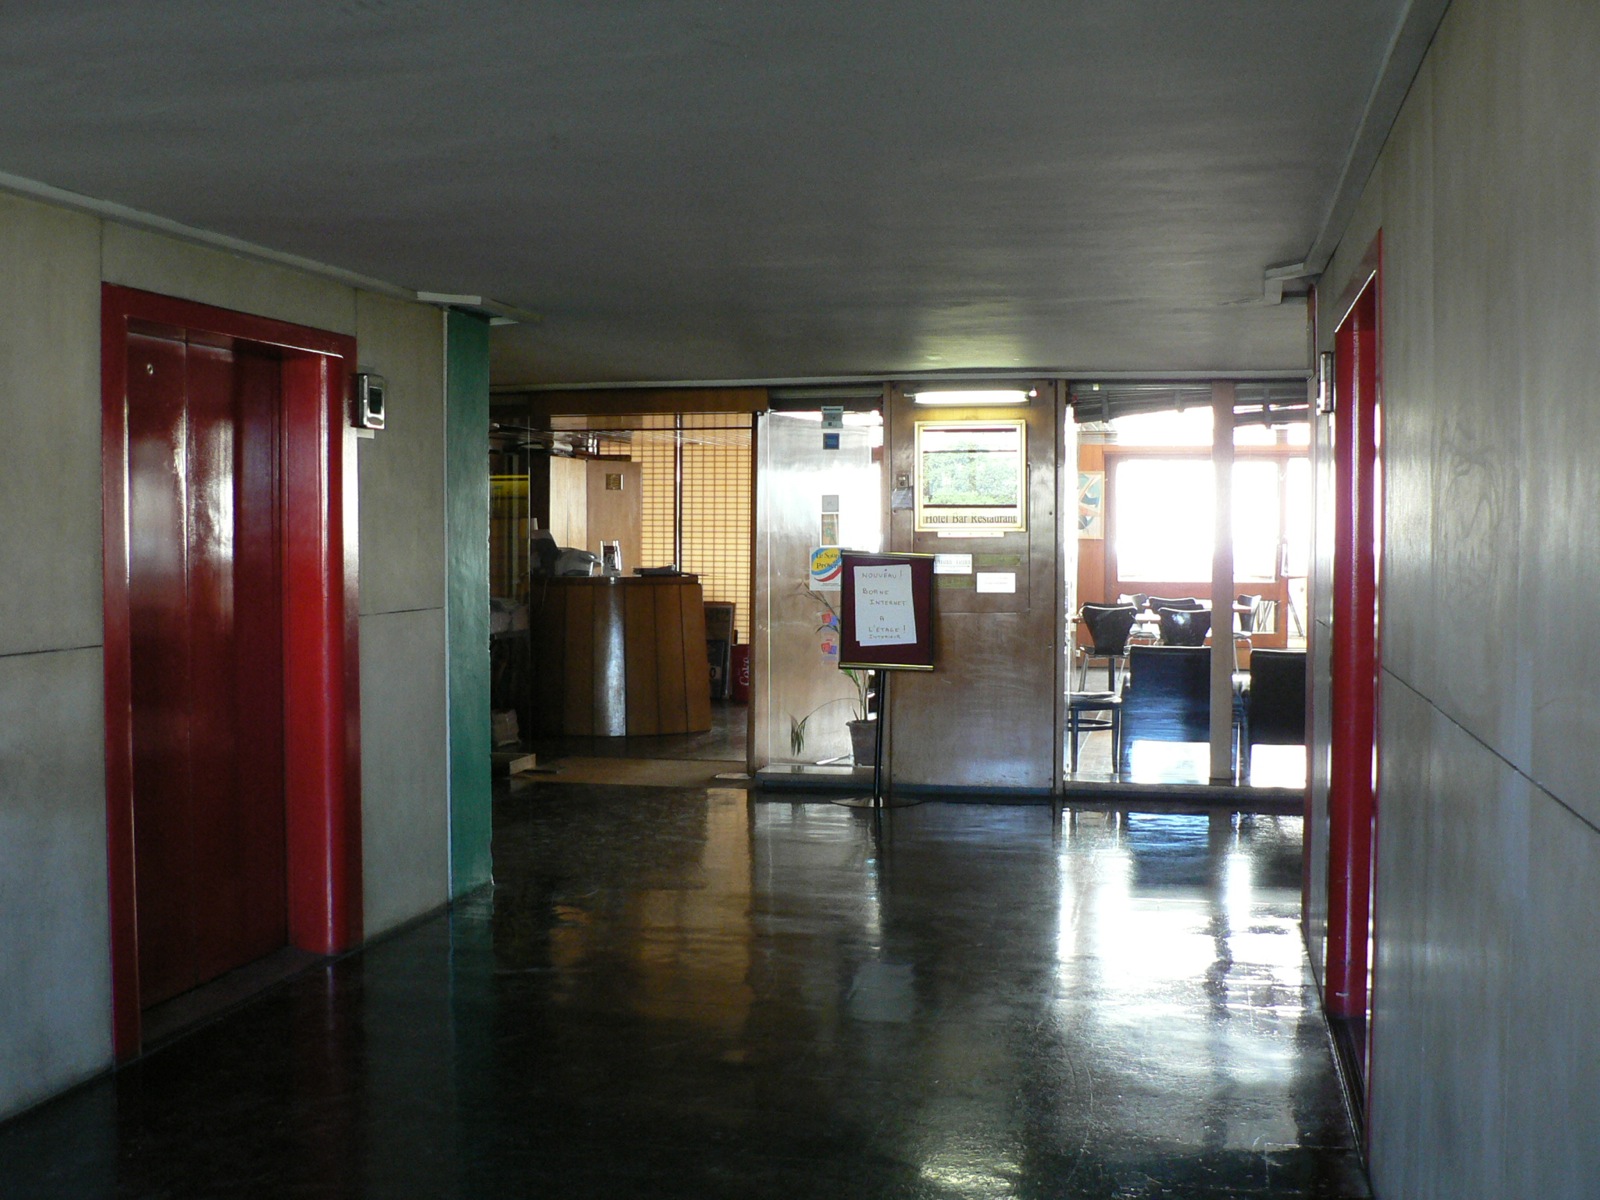 the hallway leads to the room where there is a counter and refrigerator